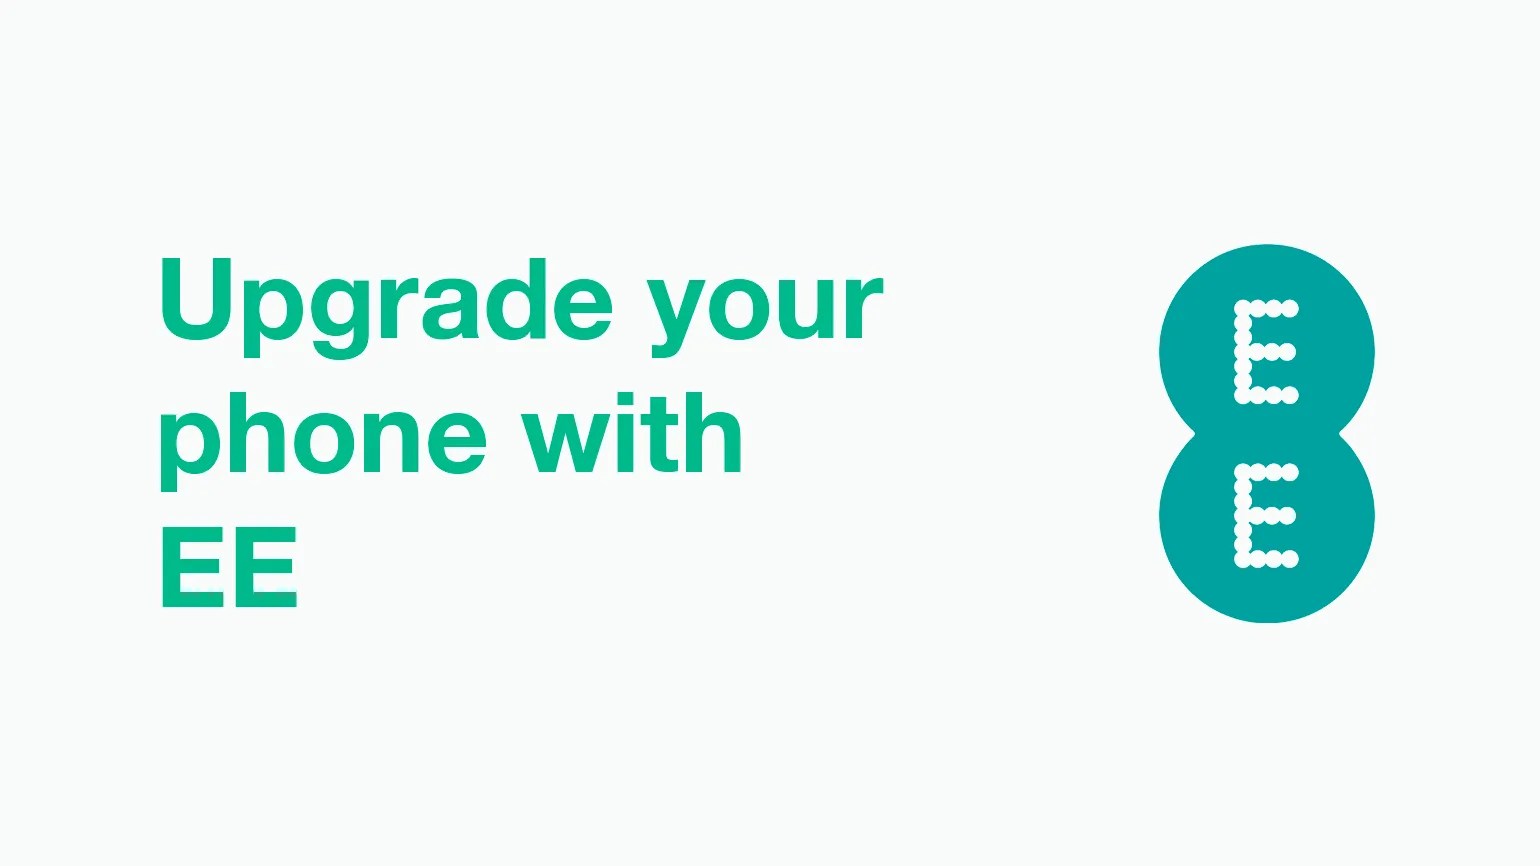 Upgrading your phone on EE